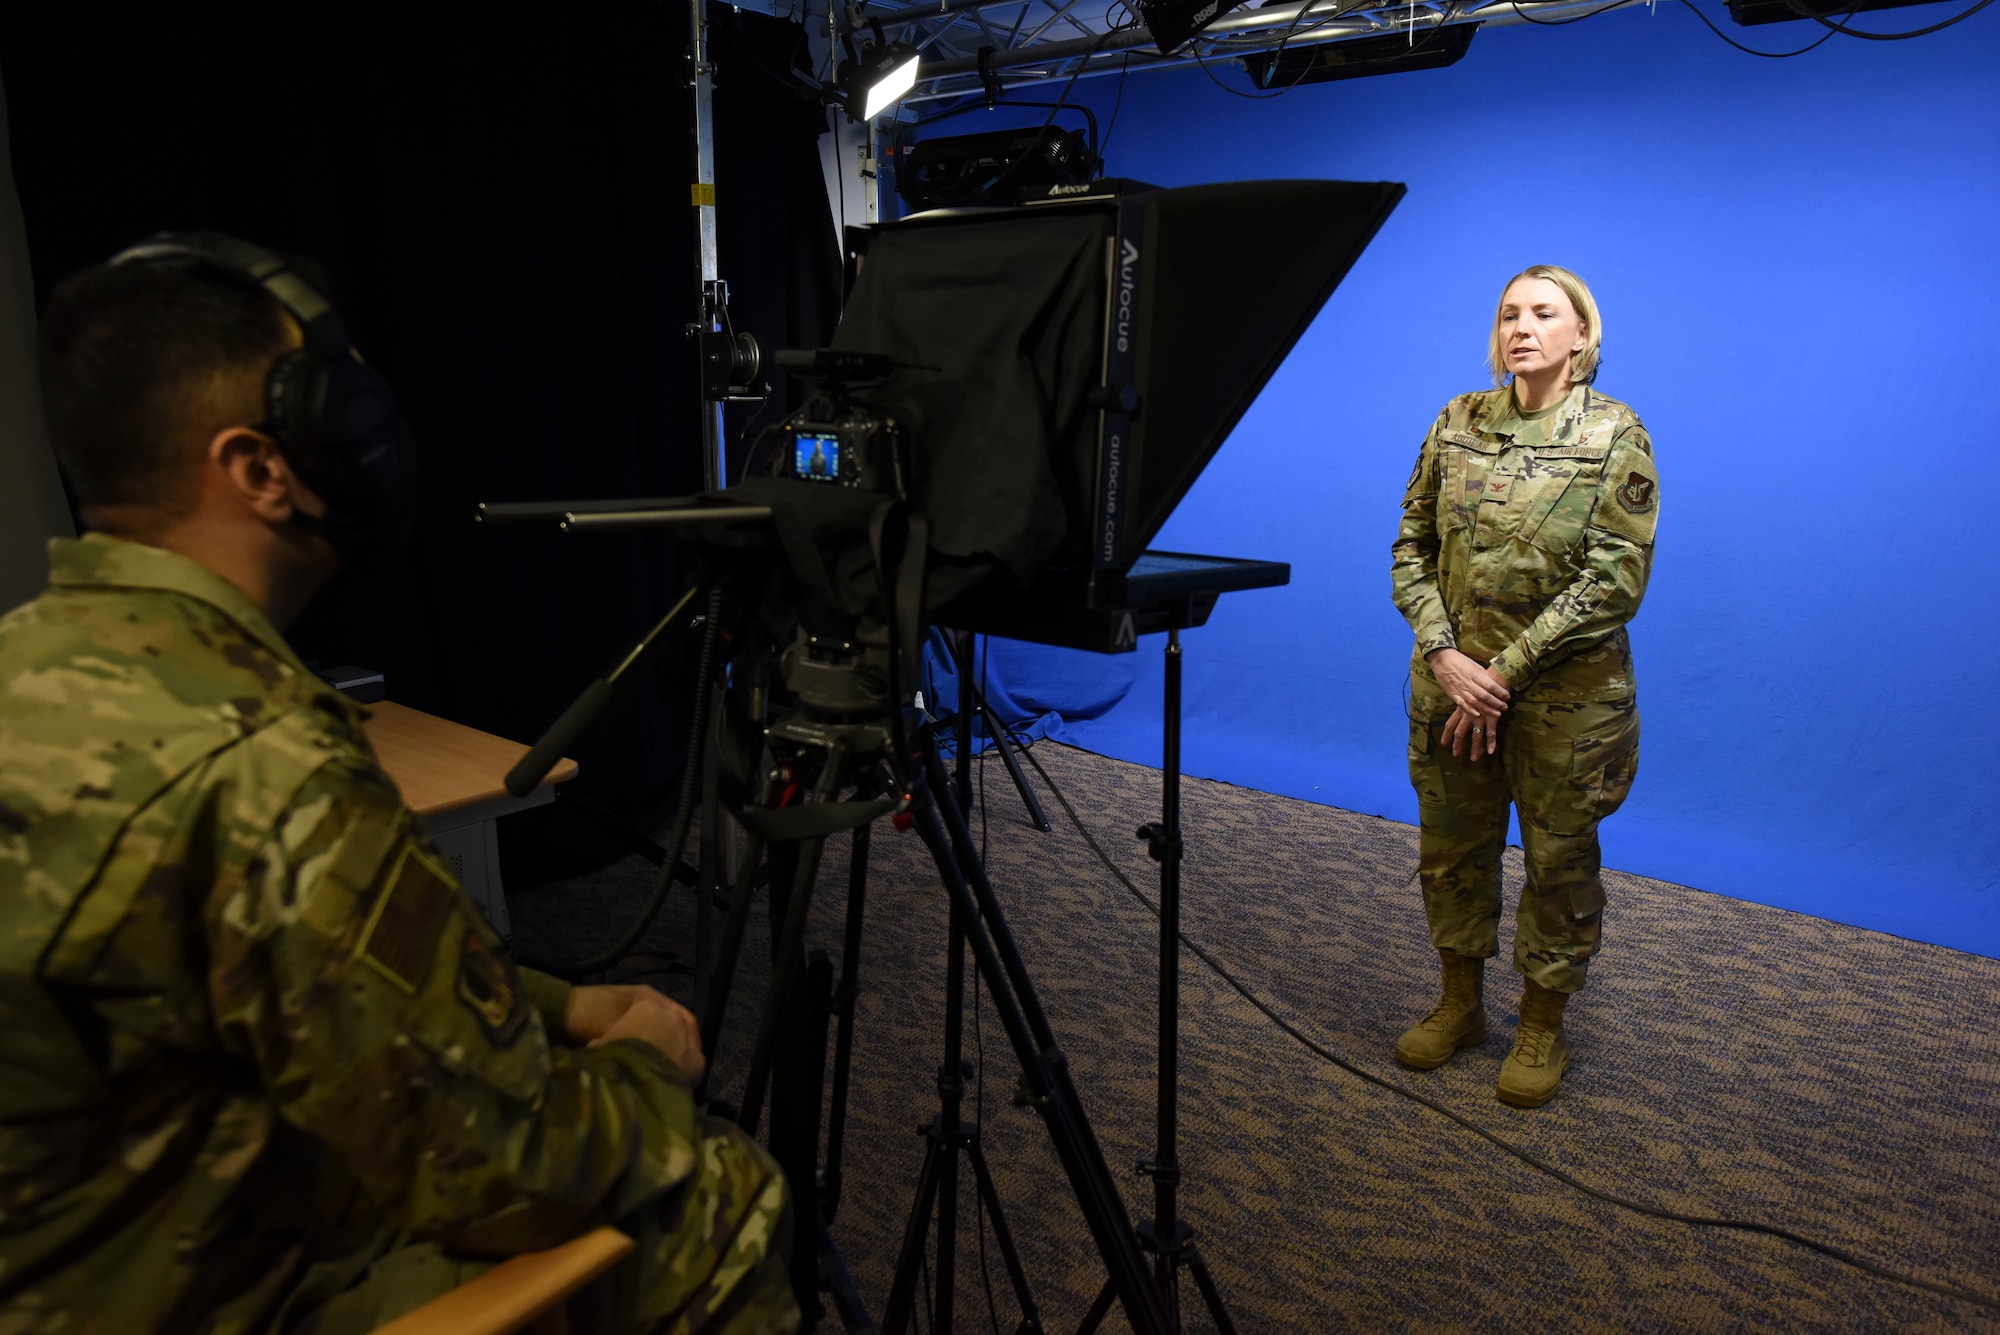 U.S. Air Force Col. Kirsten Aguilar, Joint Base Elmendorf-Richardson and 673d Air Base Wing commander, records a public service announcement in the 673d ABW Public Affairs studio at JBER, Alaska, Jan. 27, 2021. The recording highlighted the commanders message rescinding the Public Health Emergency originally declared on Nov. 9, 2020, due to the steady reduction in community transmission of COVID-19 and maintained medical capability and sufficient testing capacity, as well as announcing JBER entering Health Protection Condition BRAVO Jan. 29, 2021. (U.S. Air Force photo by Senior Airman Crystal A. Jenkins)